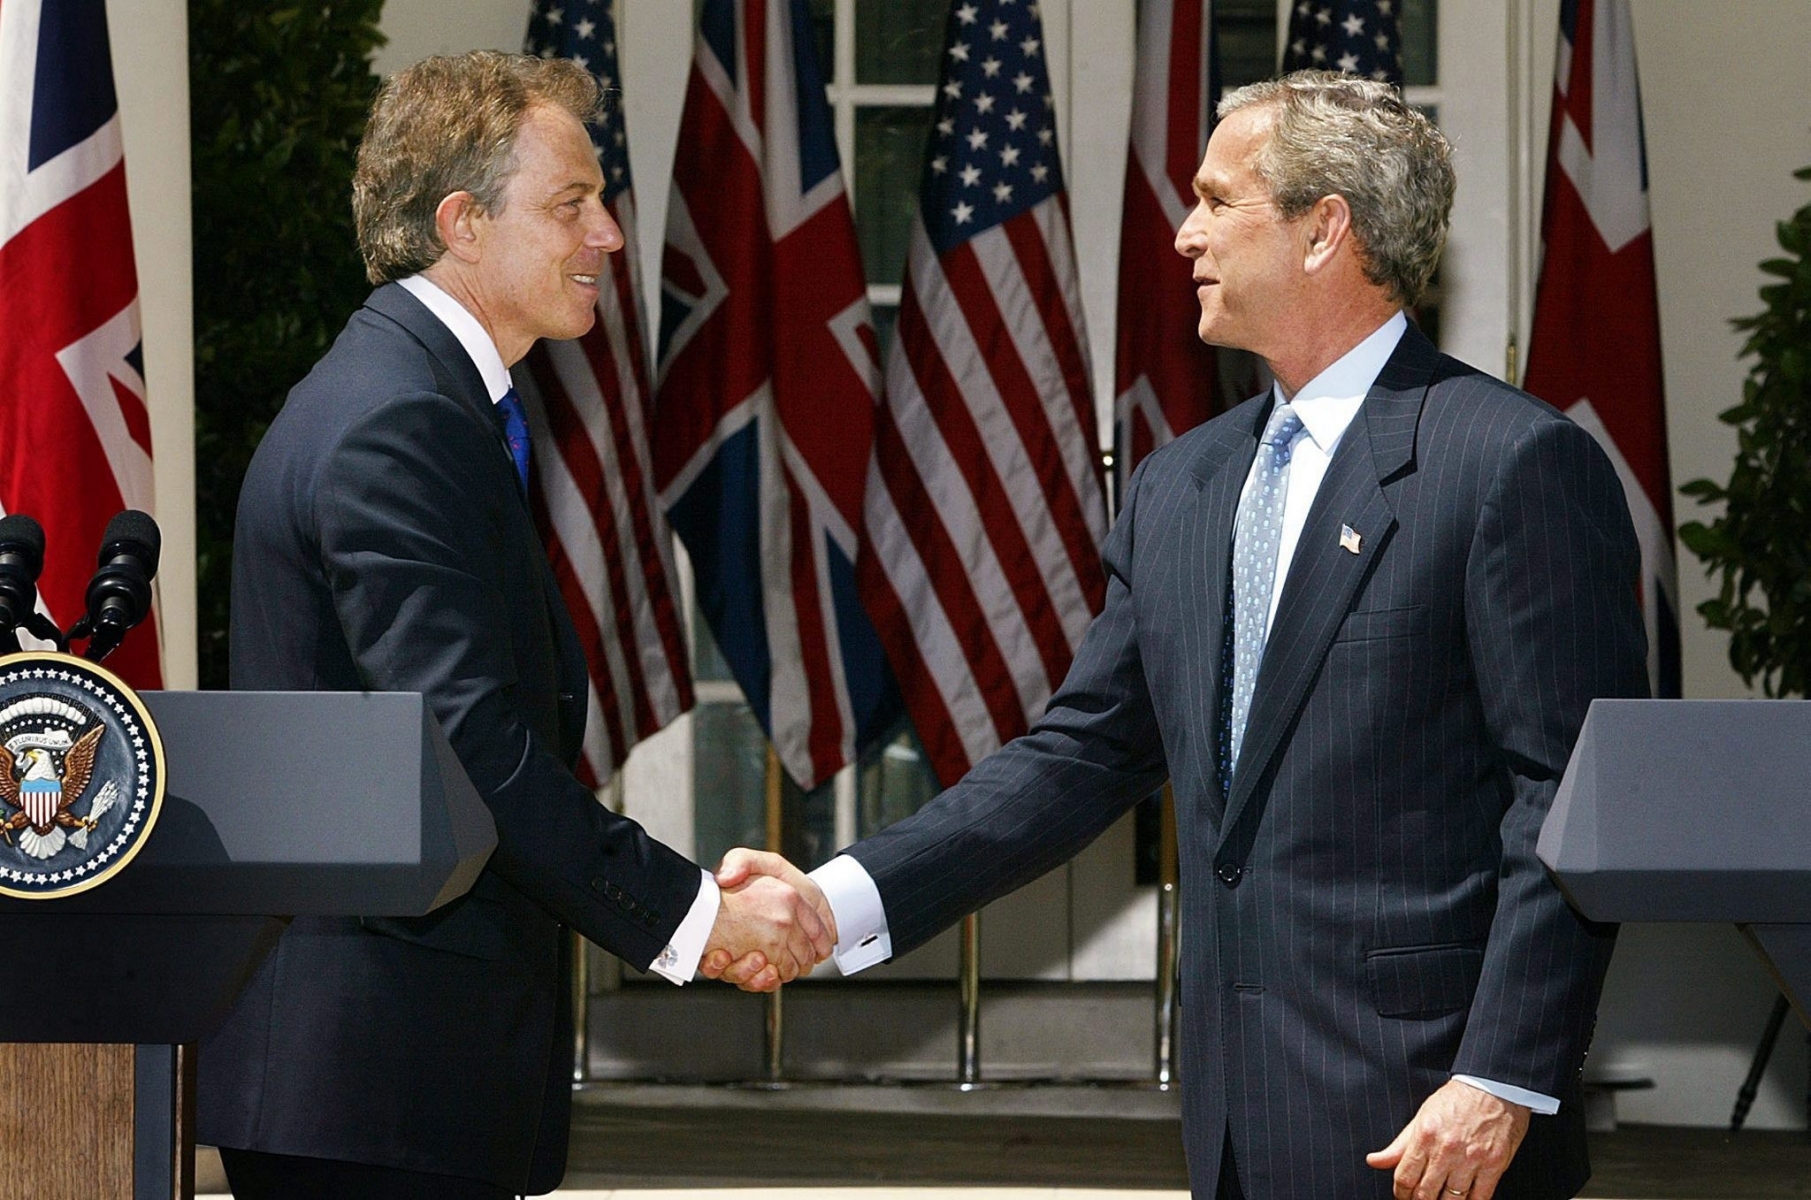 epa05410201 (FILE) A file photo dated 16 April 2004 showing then US President George W. Bush (R) shaking hands with then British Prime Minister Tony Blair after the two leaders answered questions from the news media during a joint press conference in the Rose Garden of the White House, Washington, USA. The report on whether it was right and neccessary to invade Iraq by Sir John Chilcot concluded 06 July 2016 the invasion and subsequent war against Iraq was 'not the last resort'. Chilcot also said US and British policy on Iraq based on 'flawed intelligence and assessments'.  EPA/SHAWN THEW *** Local Caption *** 00173267 FILE USA BRITAIN IRAQ WAR INQUIRY